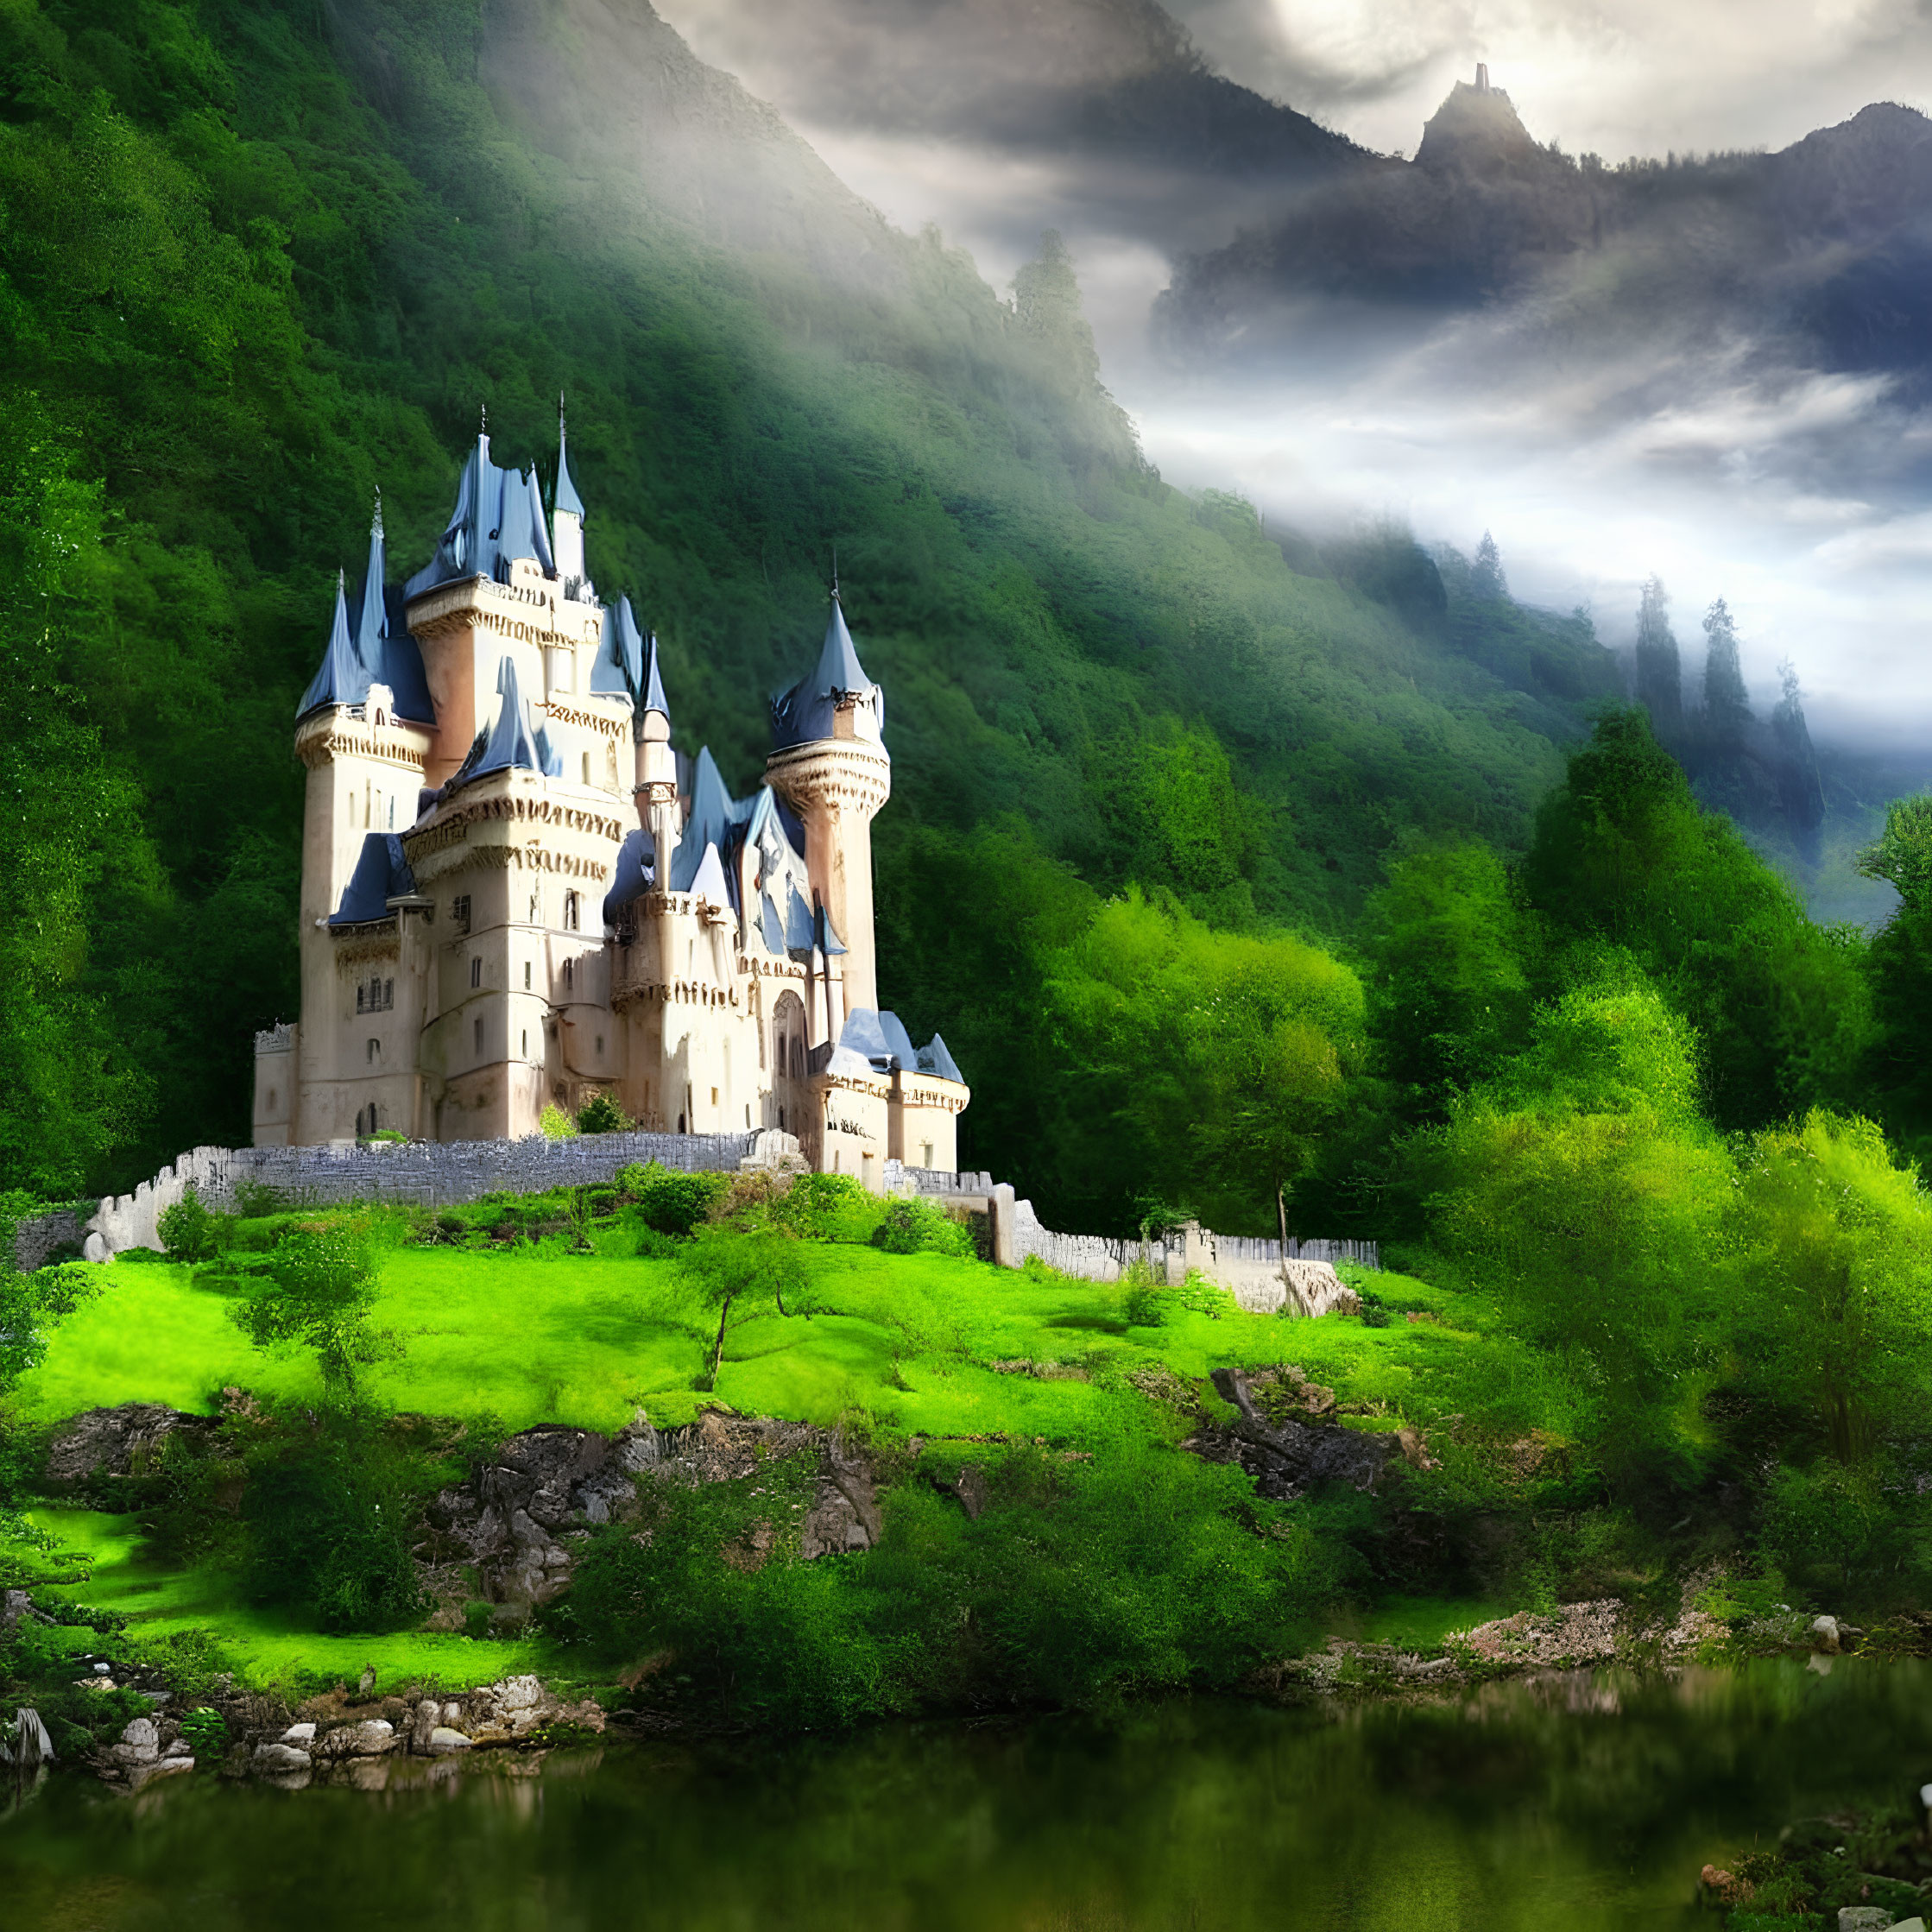 Majestic castle with spires in lush greenery and misty mountains